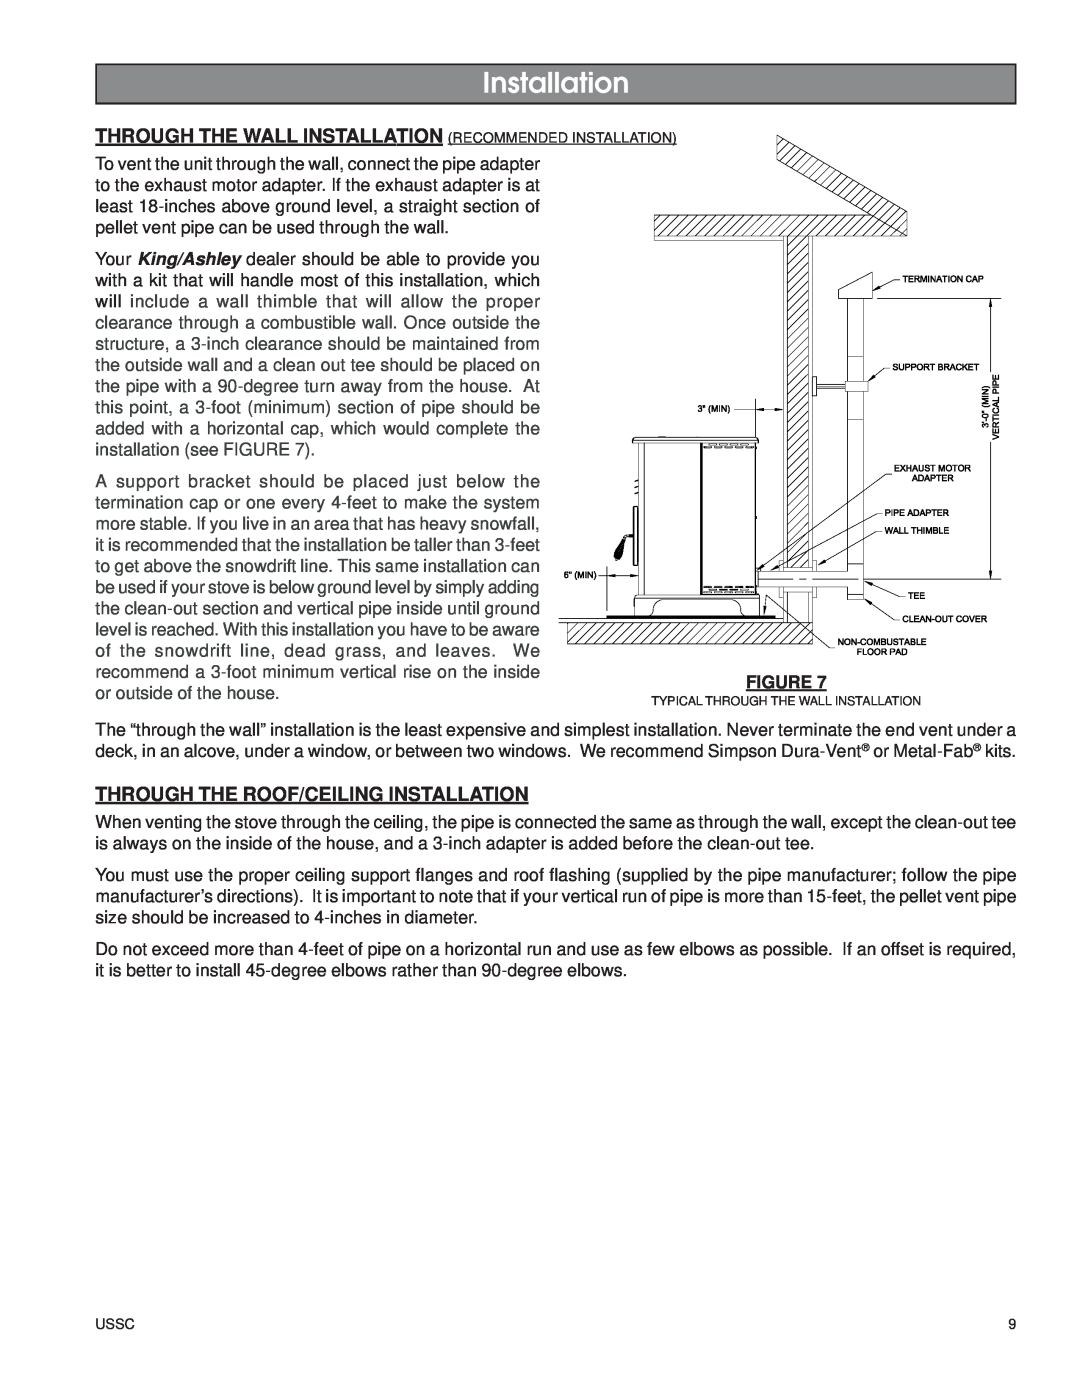 United States Stove 5500XL owner manual Through The Roof/Ceiling Installation 